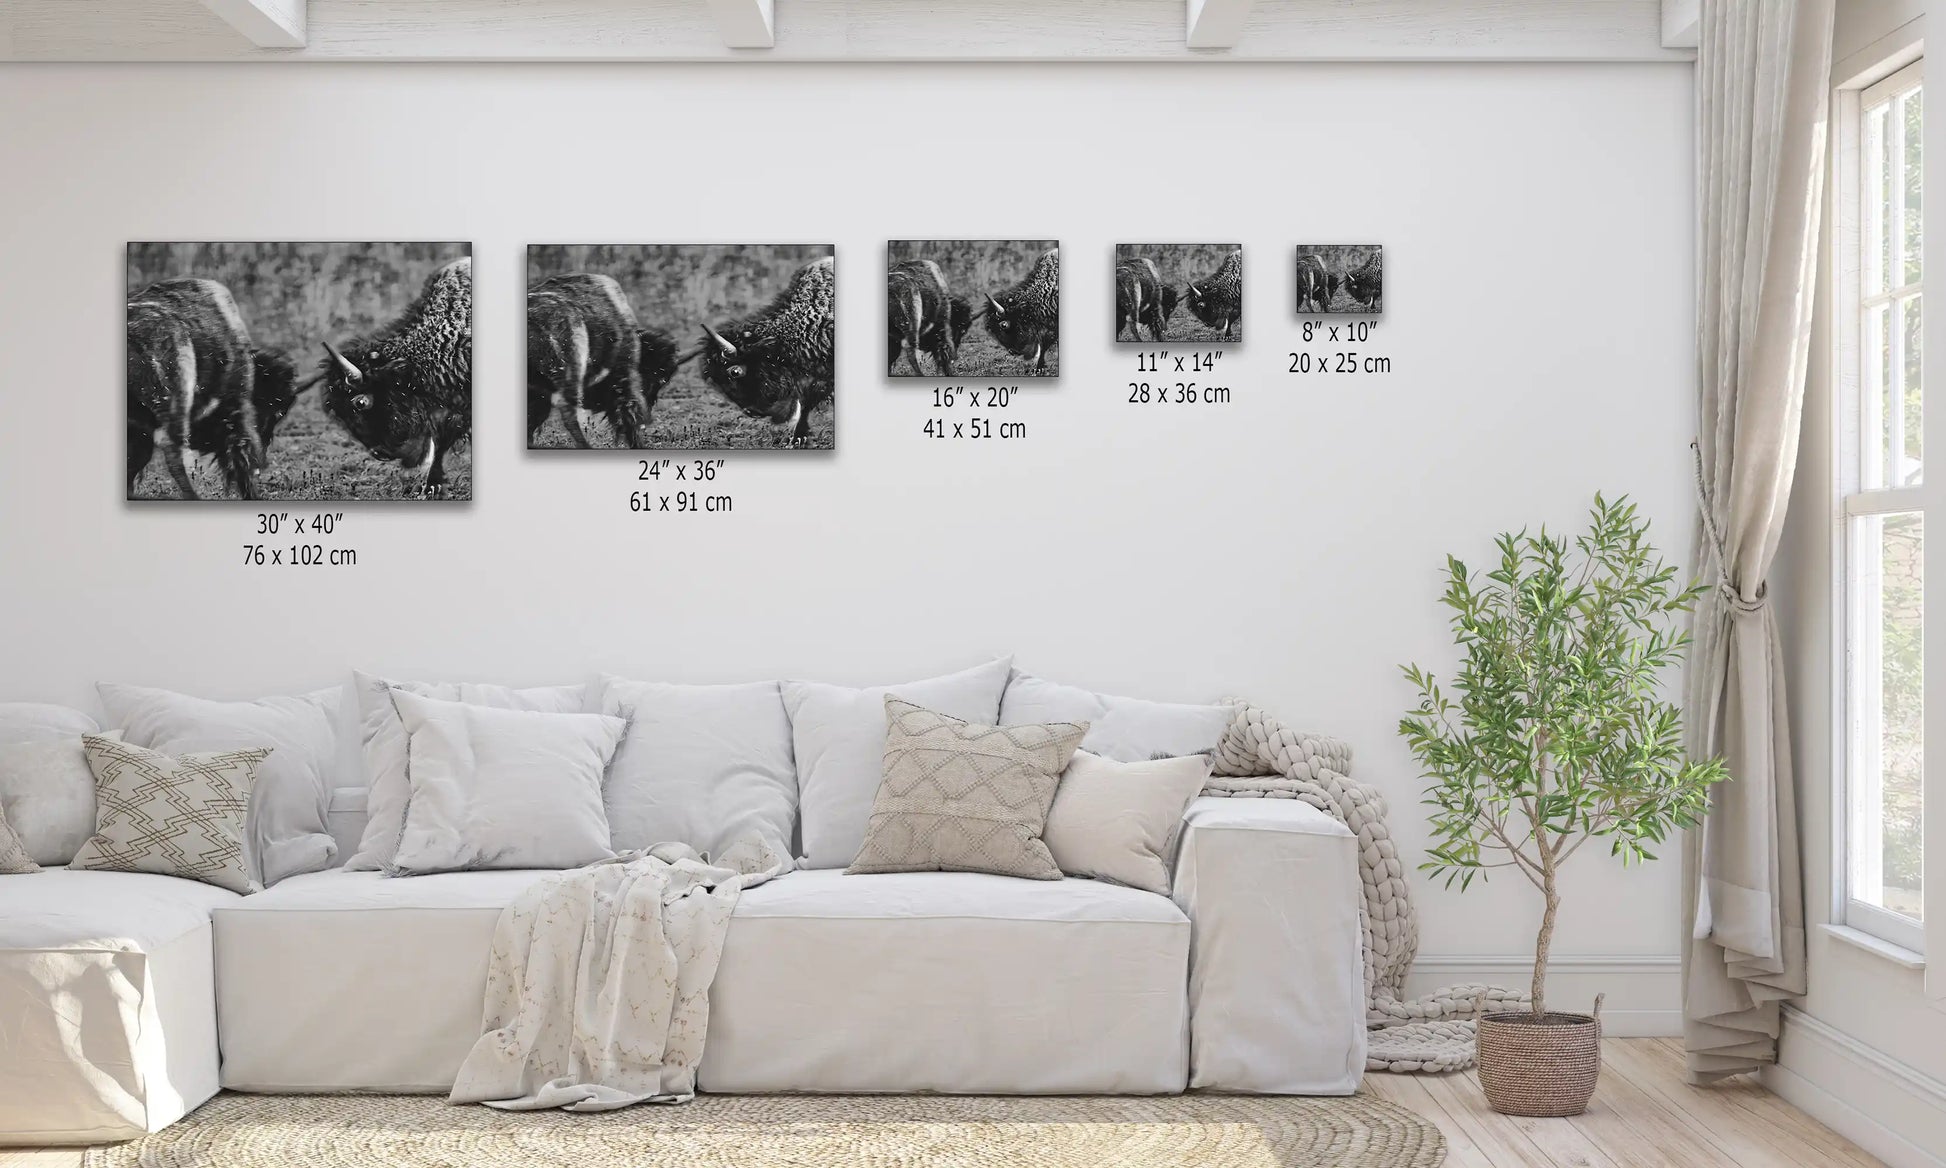 Various sizes of black and white canvas prints depicting dueling bison, displayed over a couch for size comparison.